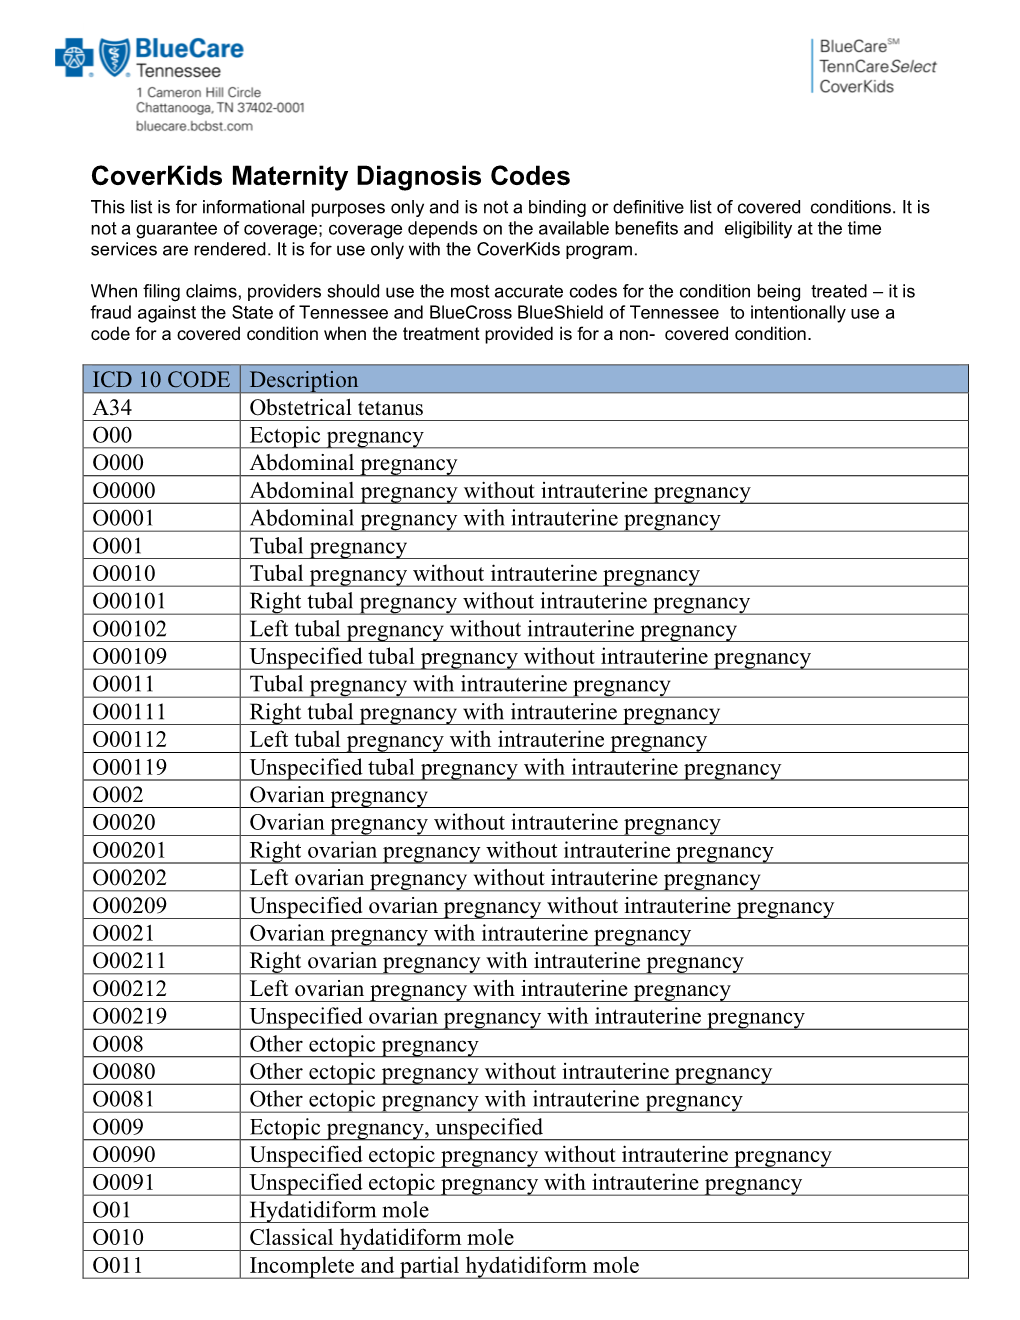 508C Coverkids Maternity Diagnosis Codes